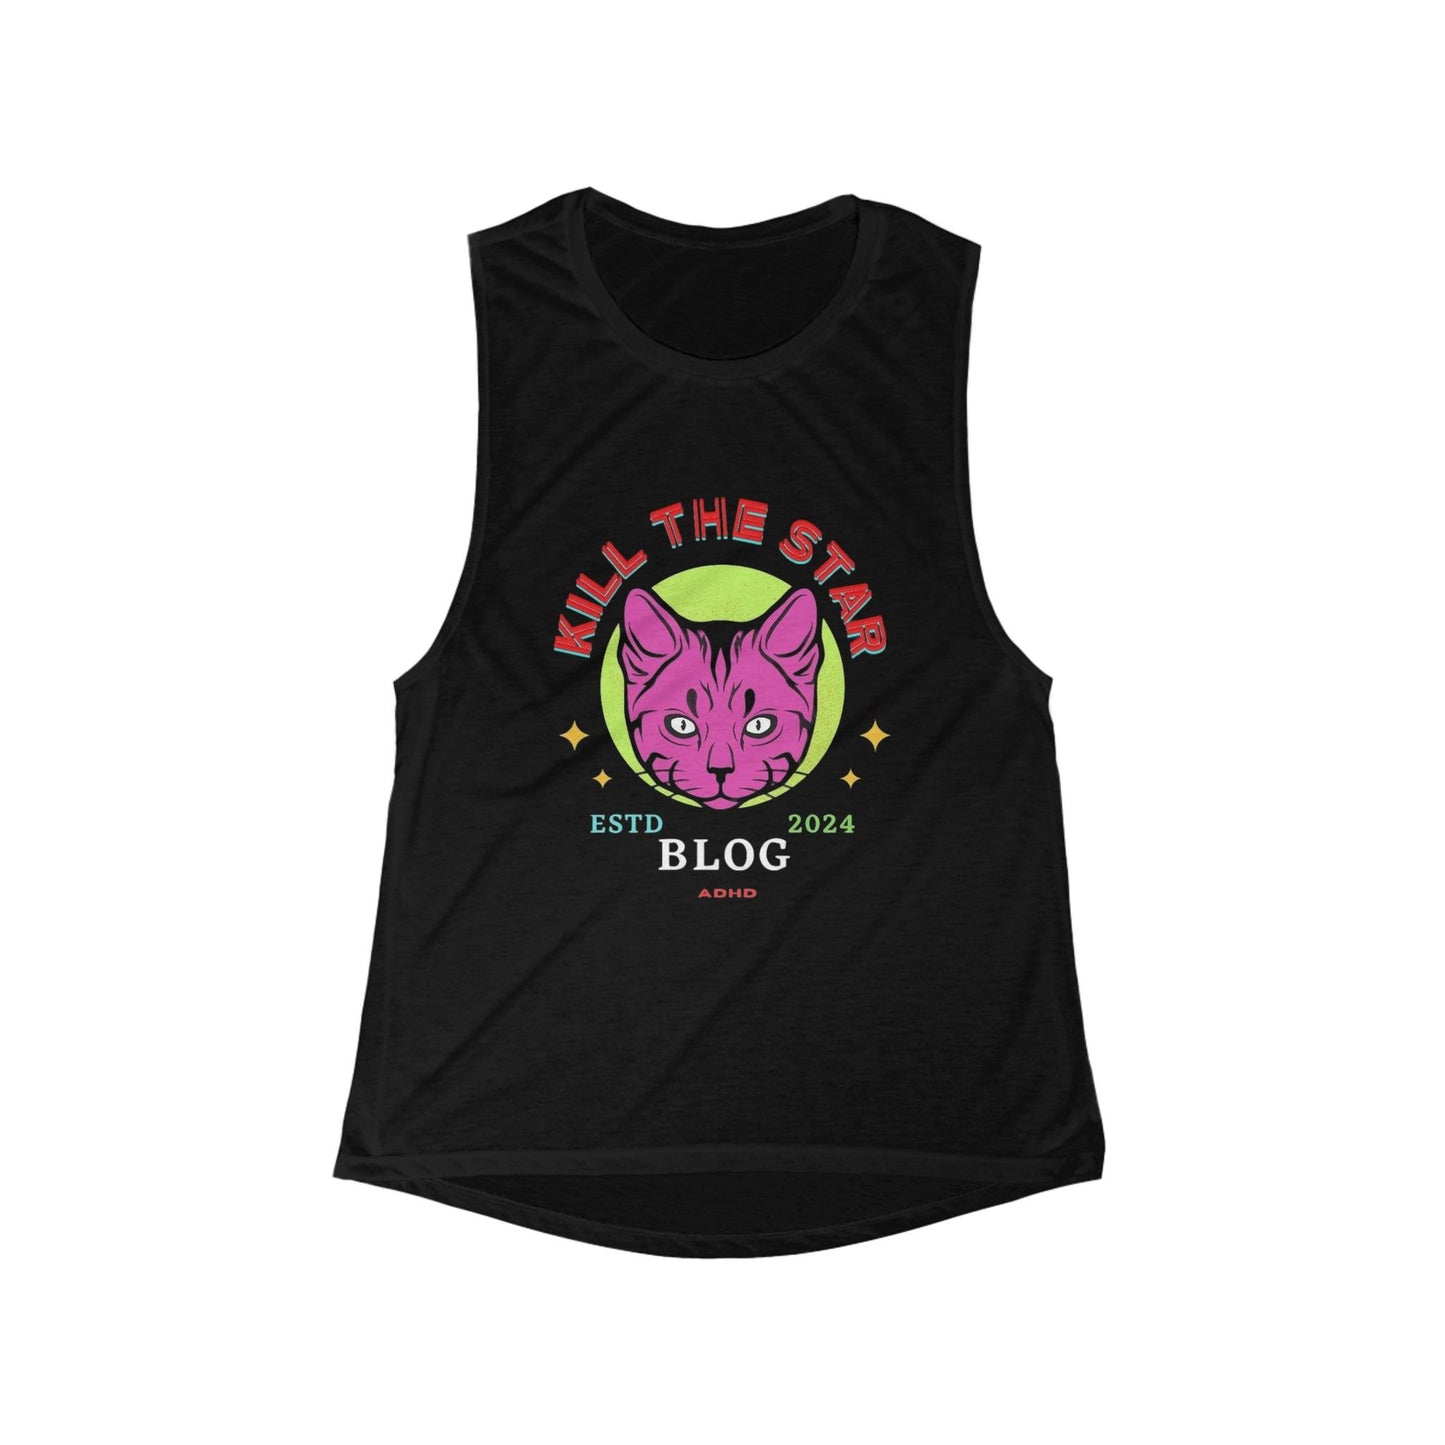 Her/Him Kat Logo Scoop Muscle Tank - Kill the Star - Untreated Adult ADHD blog